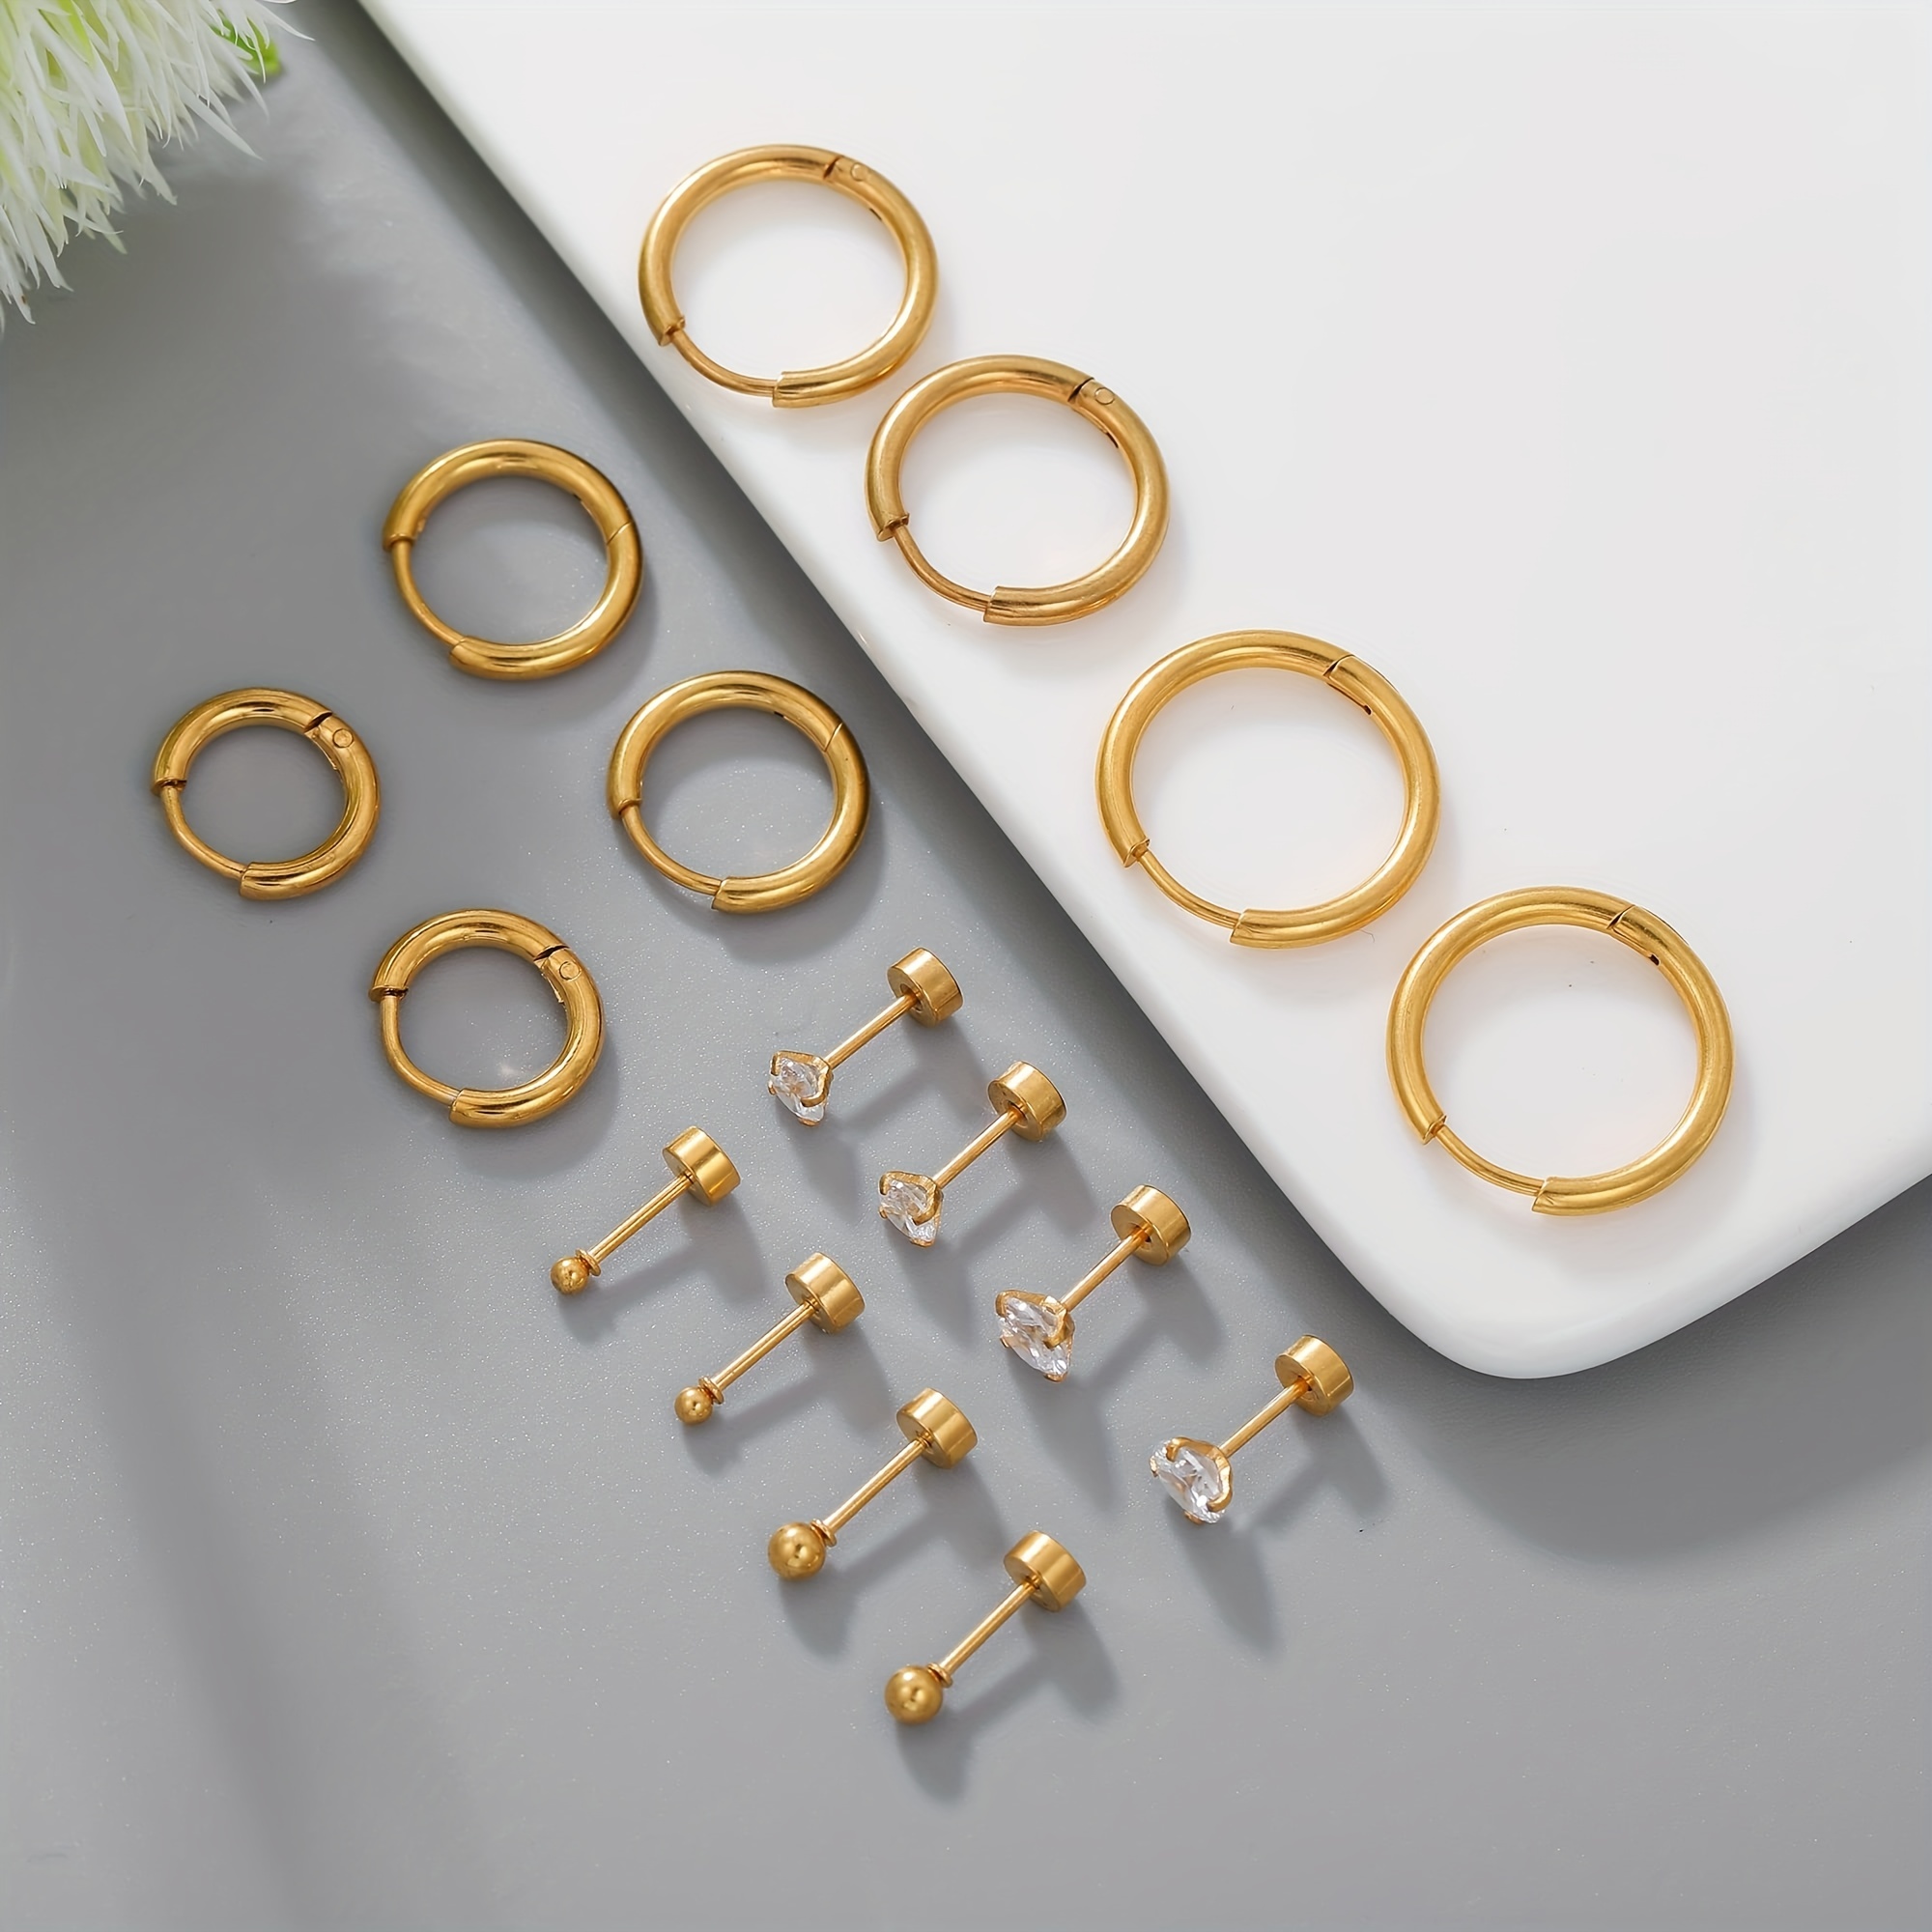 6 Pairs Hoop Earrings and Piercing Stud Earring Sets , Lightweight 14K Gold Plated Small Hoop Earrings, Classical Cute Tiny Ball Flat Back Nap